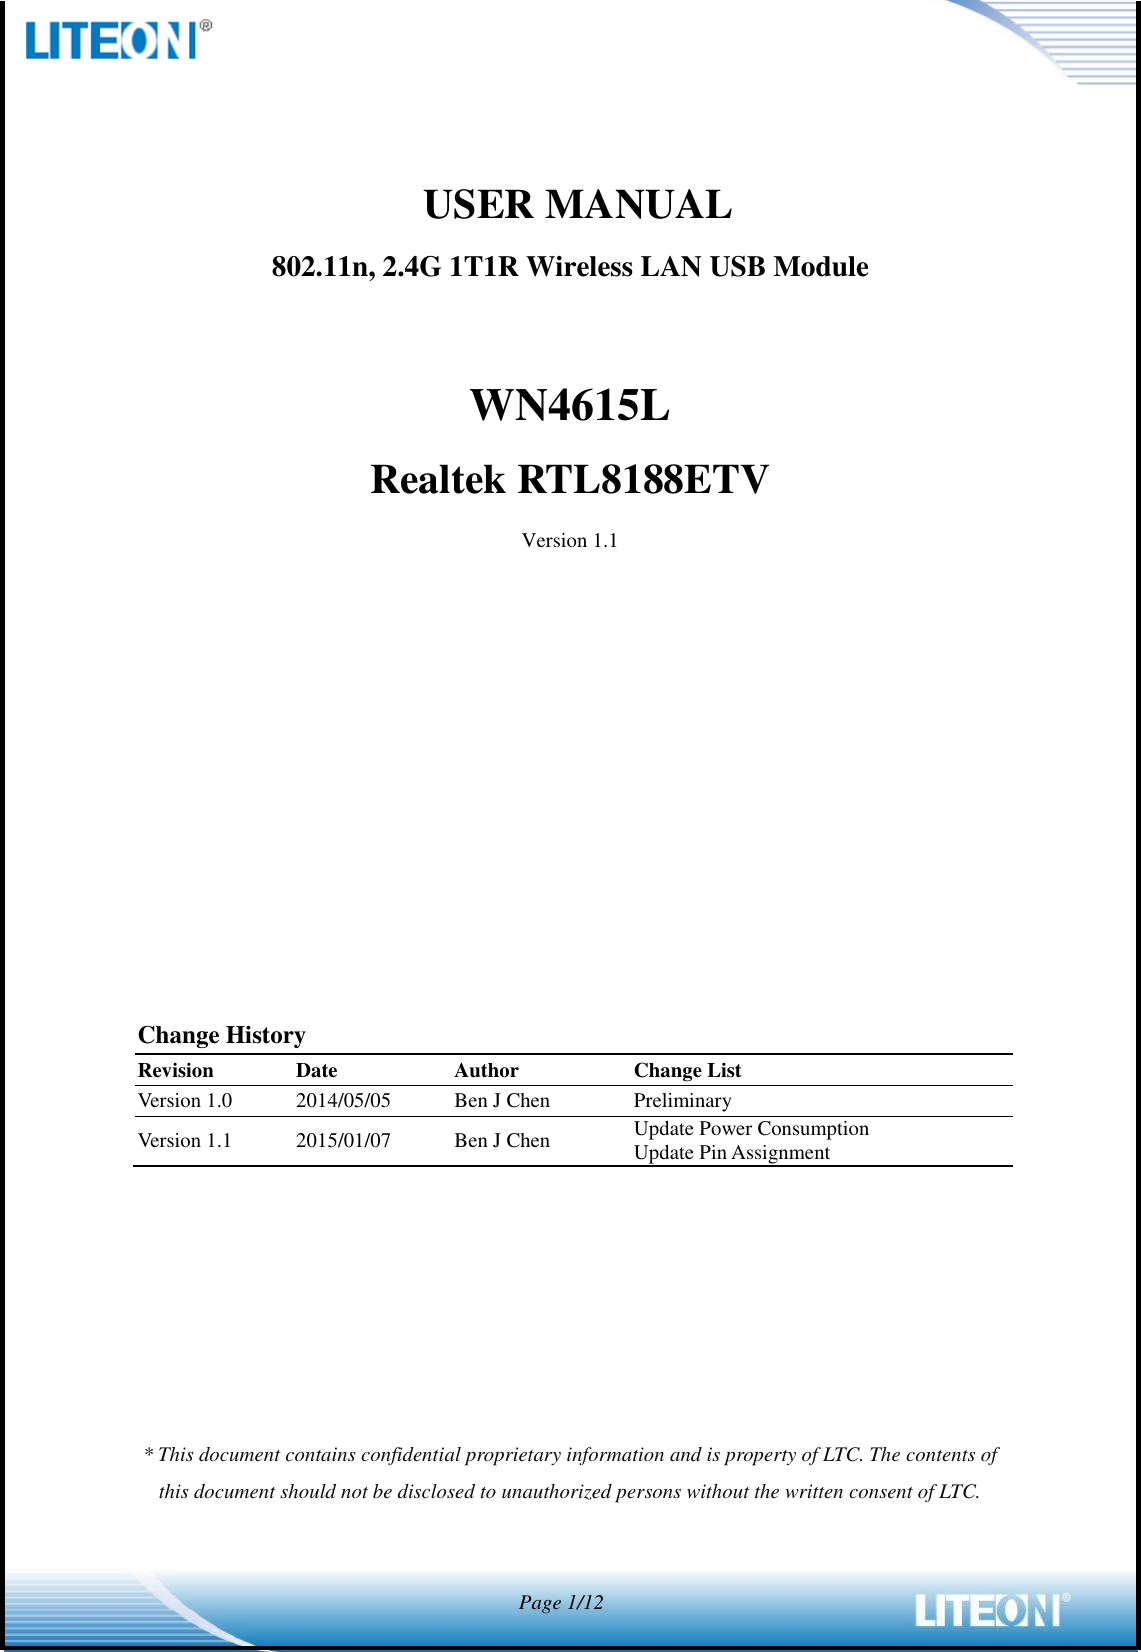            Page 1/12               USER MANUAL802.11n, 2.4G 1T1R Wireless LAN USB Module  WN4615L Realtek RTL8188ETV Version 1.1             Change History Revision Date Author Change List Version 1.0 2014/05/05 Ben J Chen Preliminary Version 1.1 2015/01/07 Ben J Chen Update Power Consumption Update Pin Assignment          * This document contains confidential proprietary information and is property of LTC. The contents of this document should not be disclosed to unauthorized persons without the written consent of LTC.    